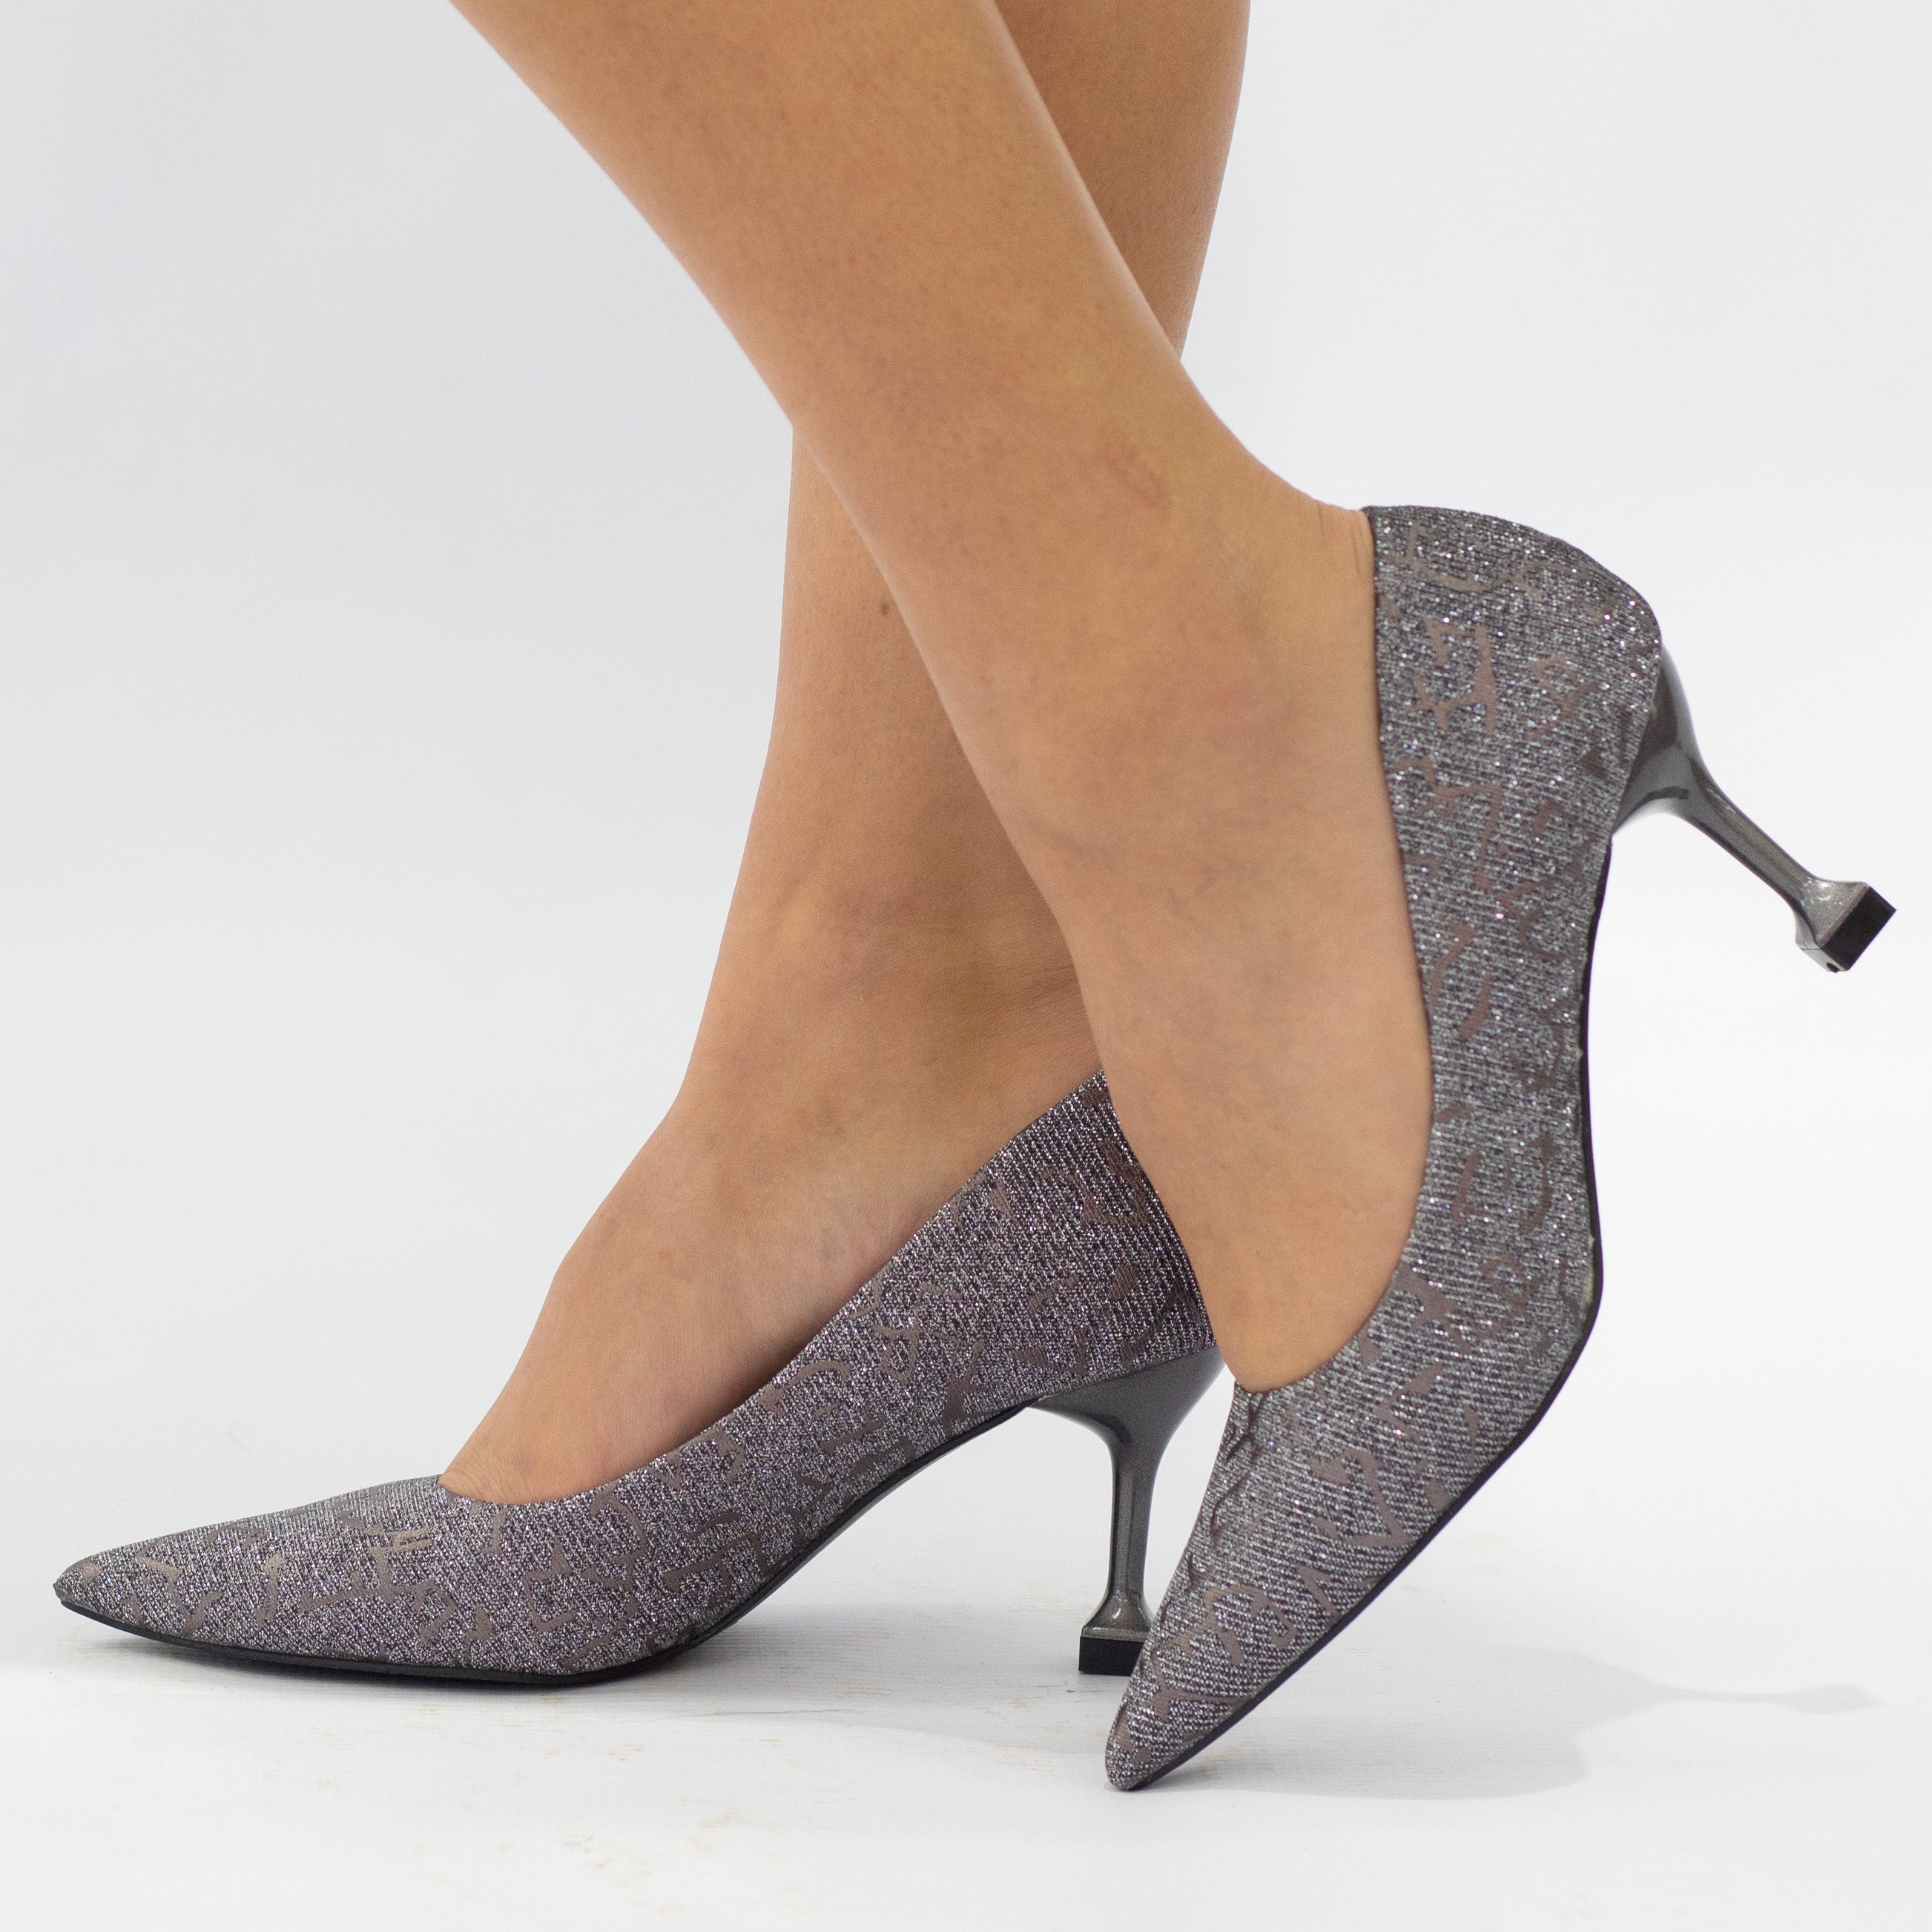 Pewter shimmer court on a 7cm heel latino